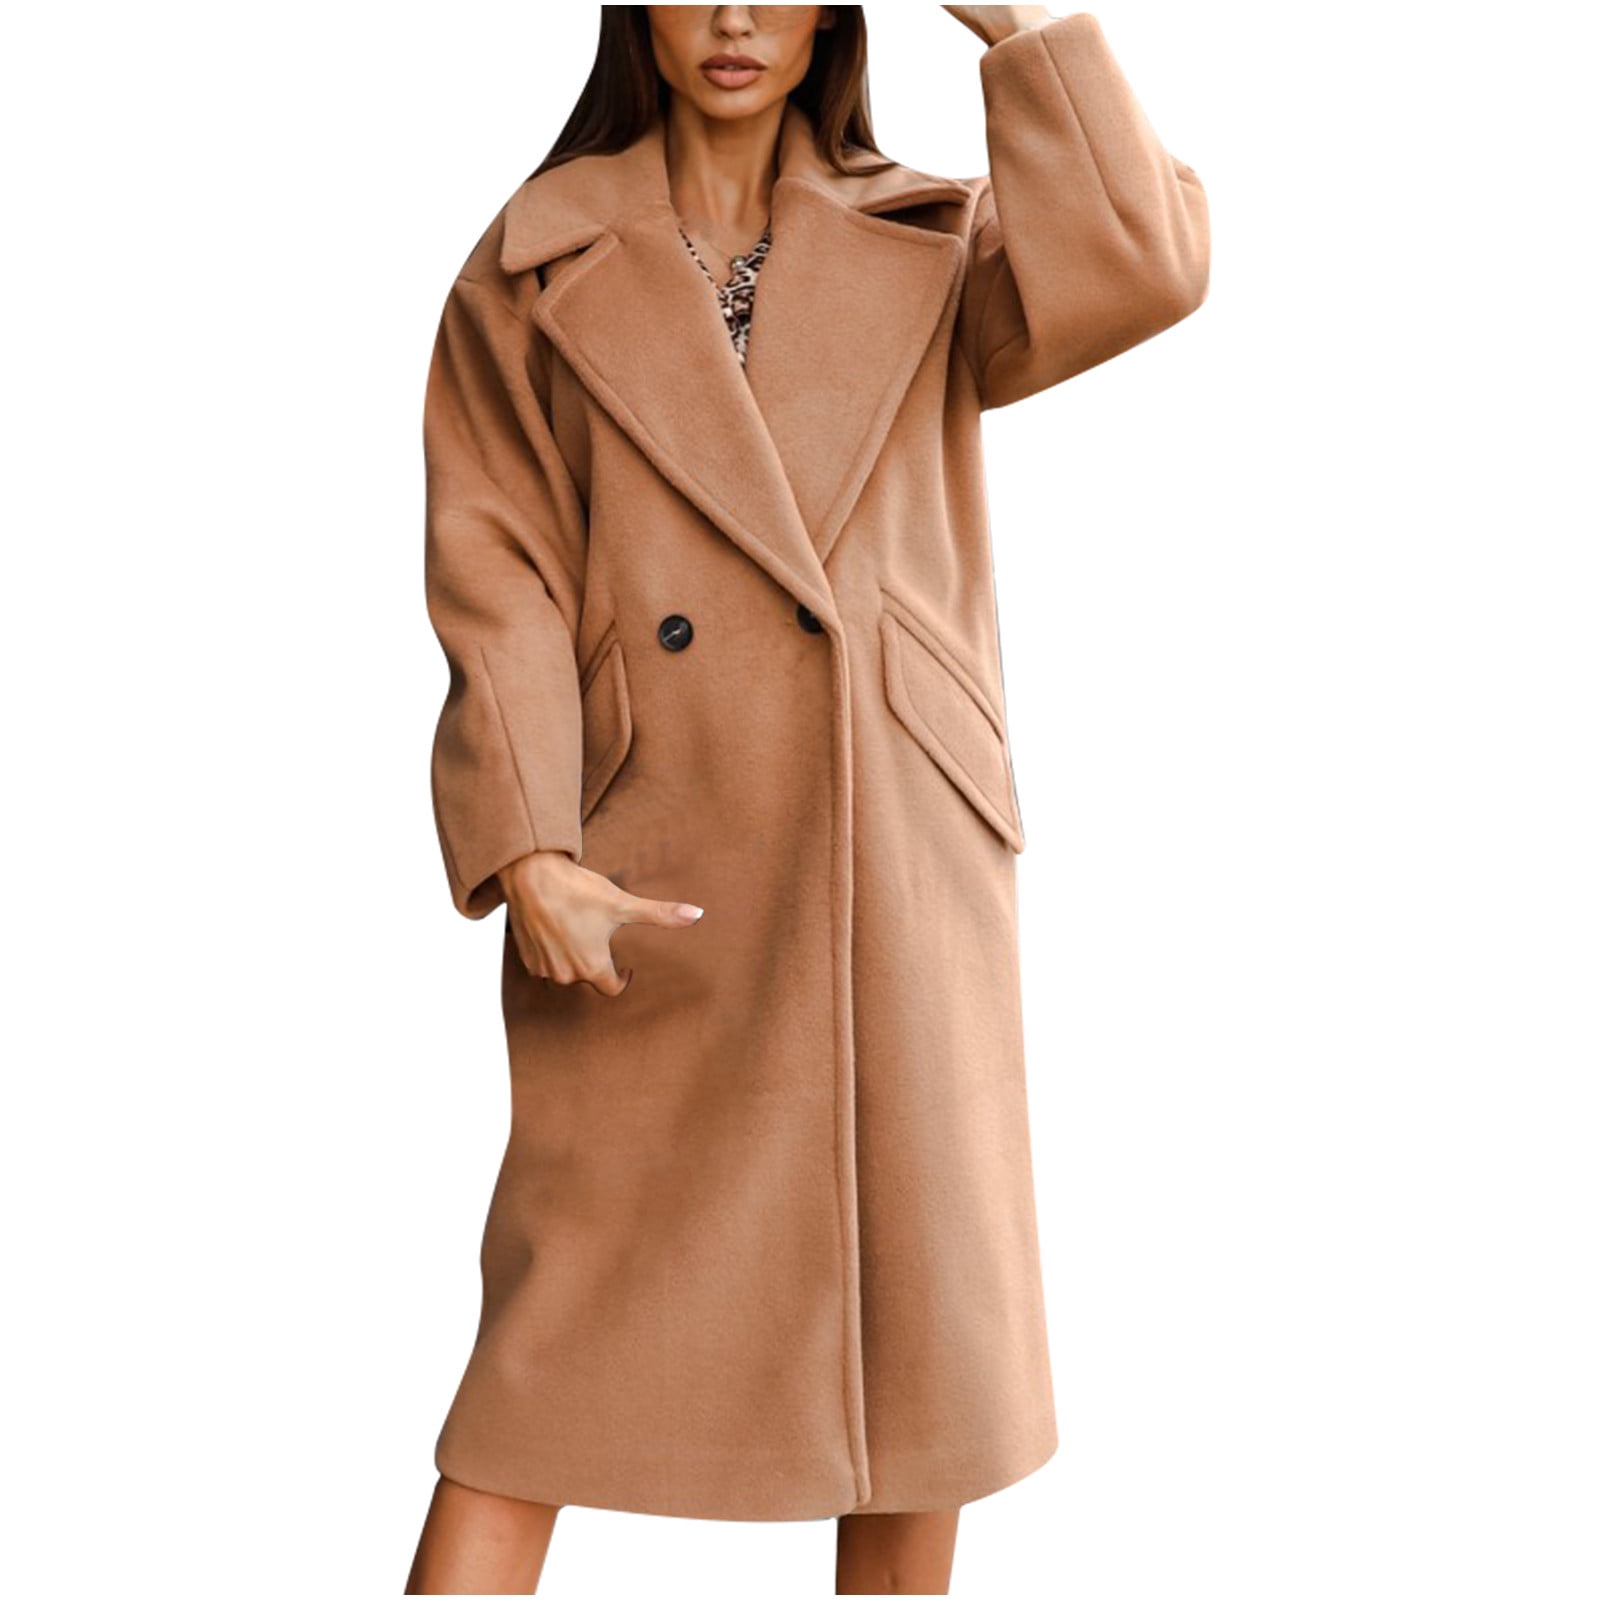  Scyoekwg my order placed by me Womens Jackets Fashion Fall  Lapel Double Breasted Thick Wool Trench Coat Winter Warm Pockets Long  Jacket : Sports & Outdoors